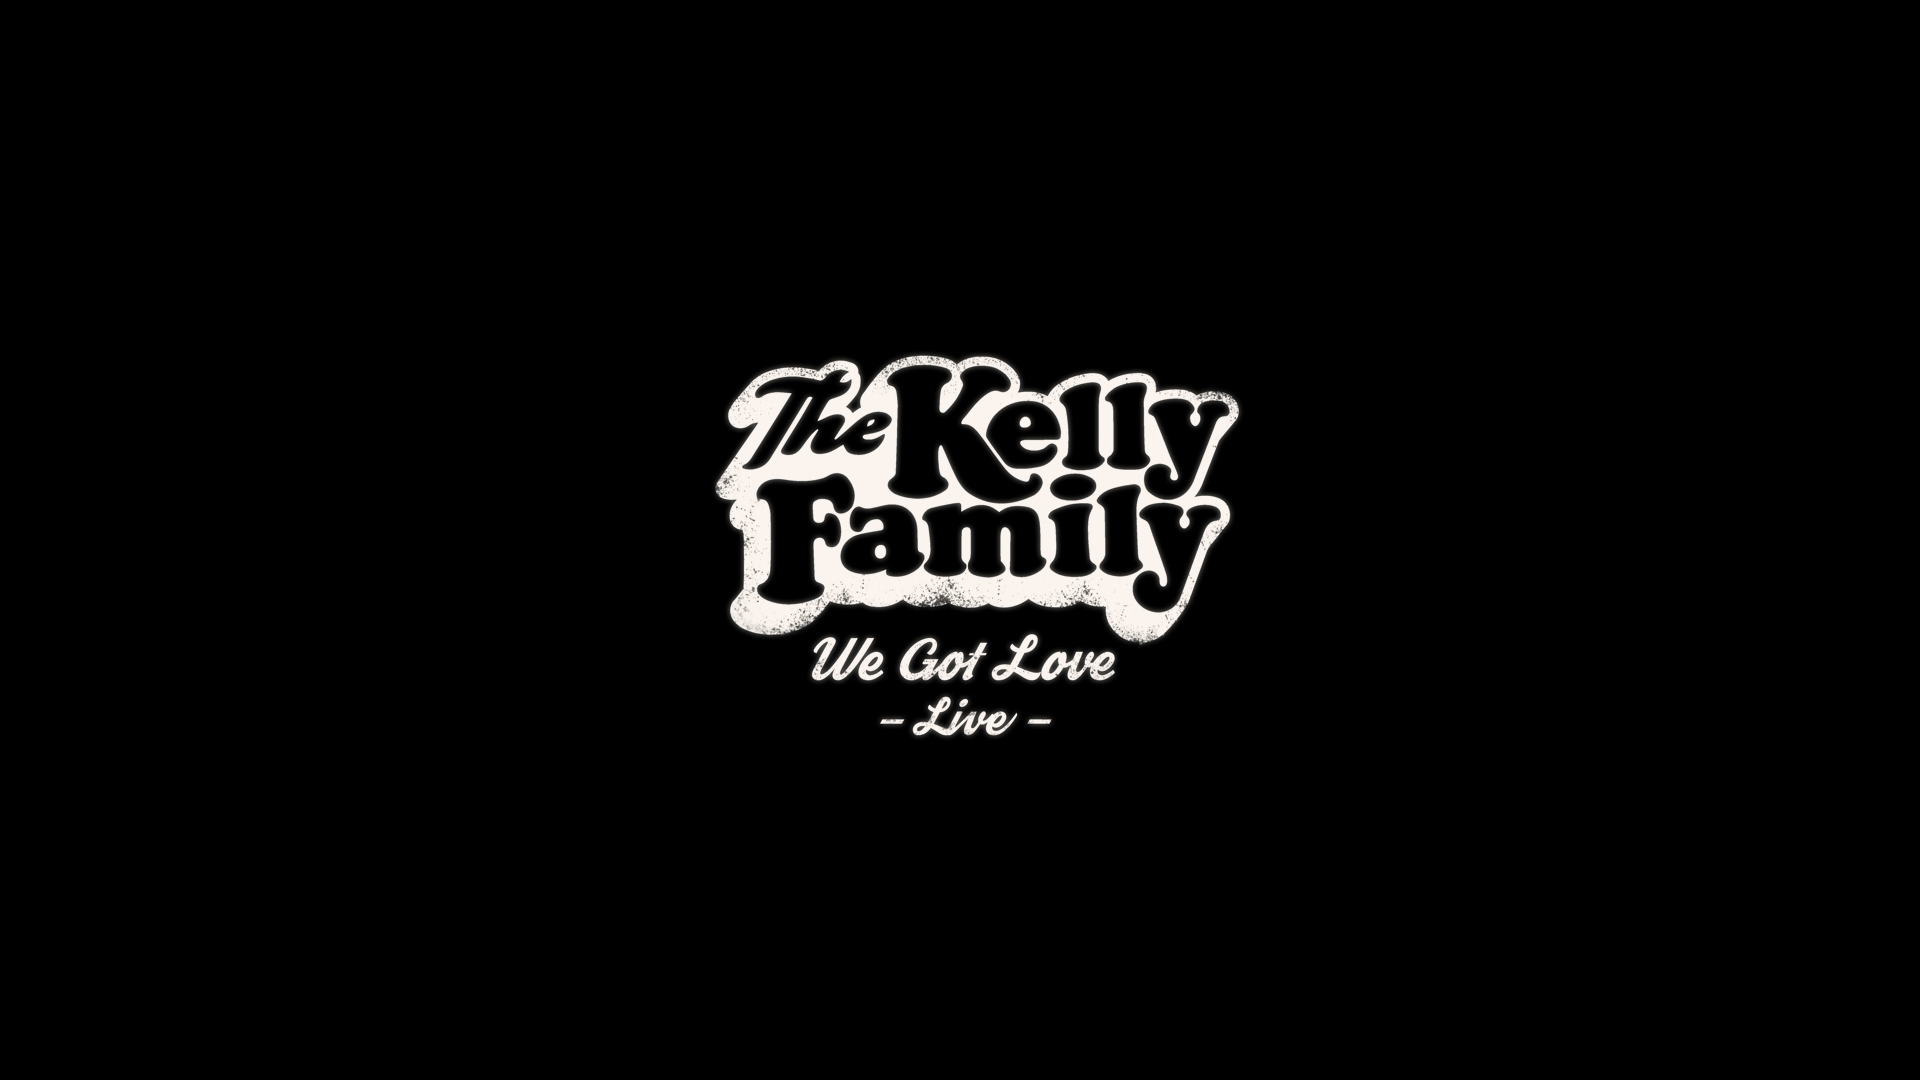 00001.m2ts(The Kelly Family.We Got Love.Live.2017)_20171231_132348.823.png